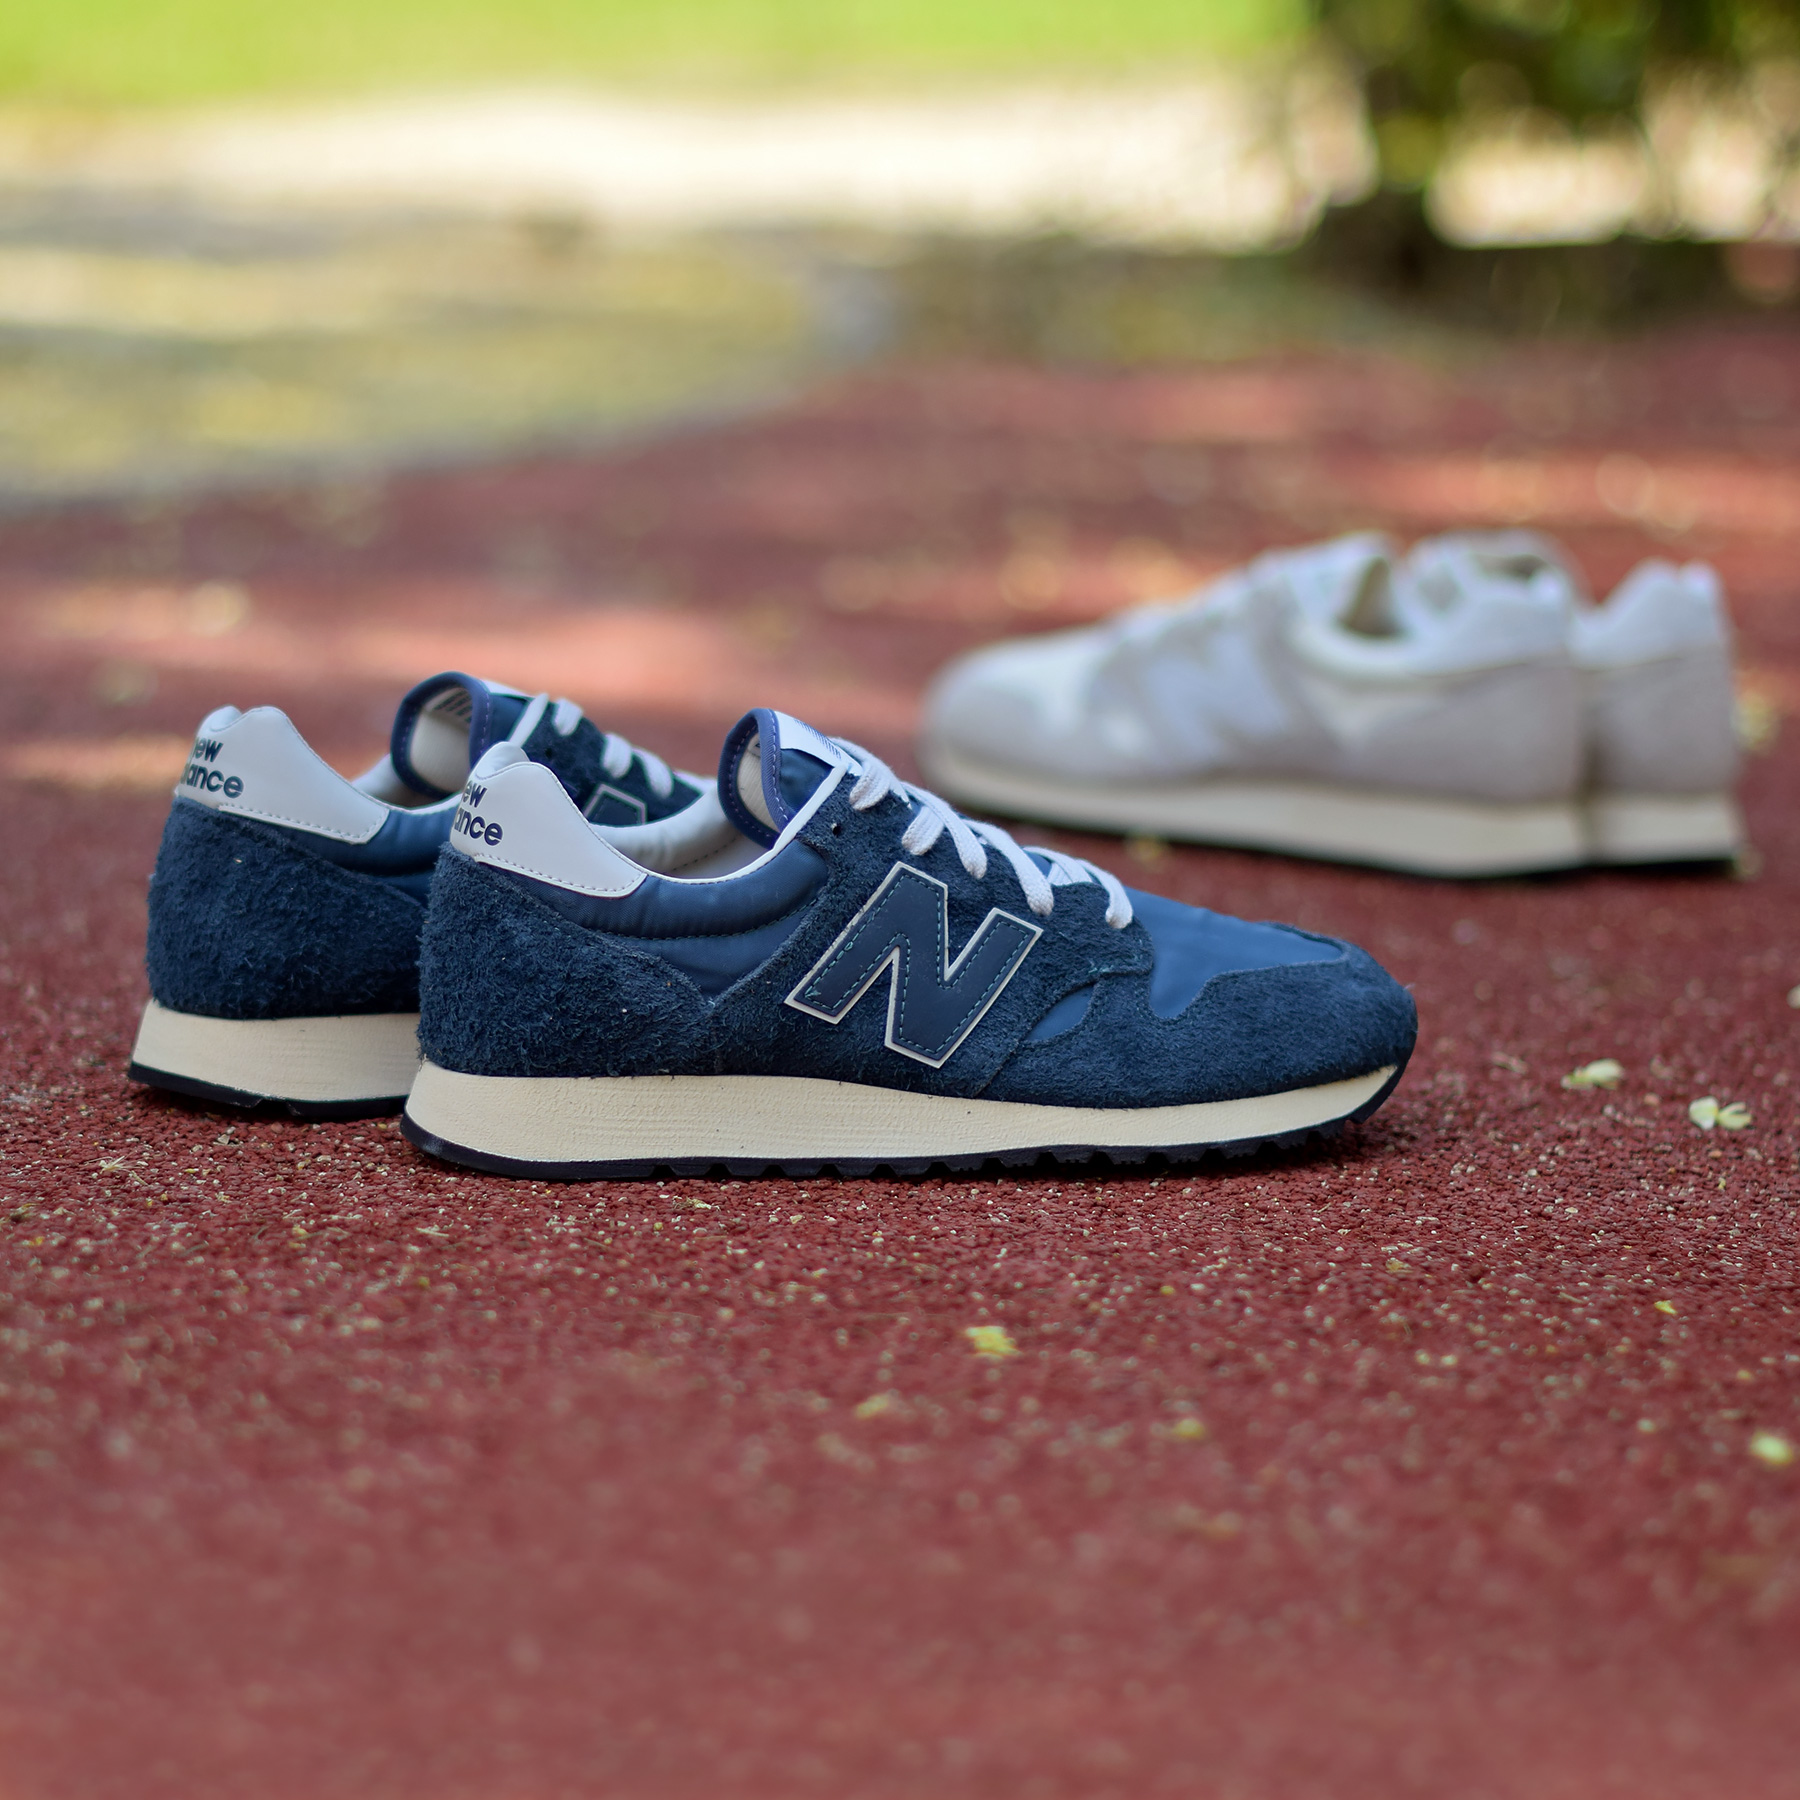 New Balance 520 Hairy Suede - Sneakers.fr